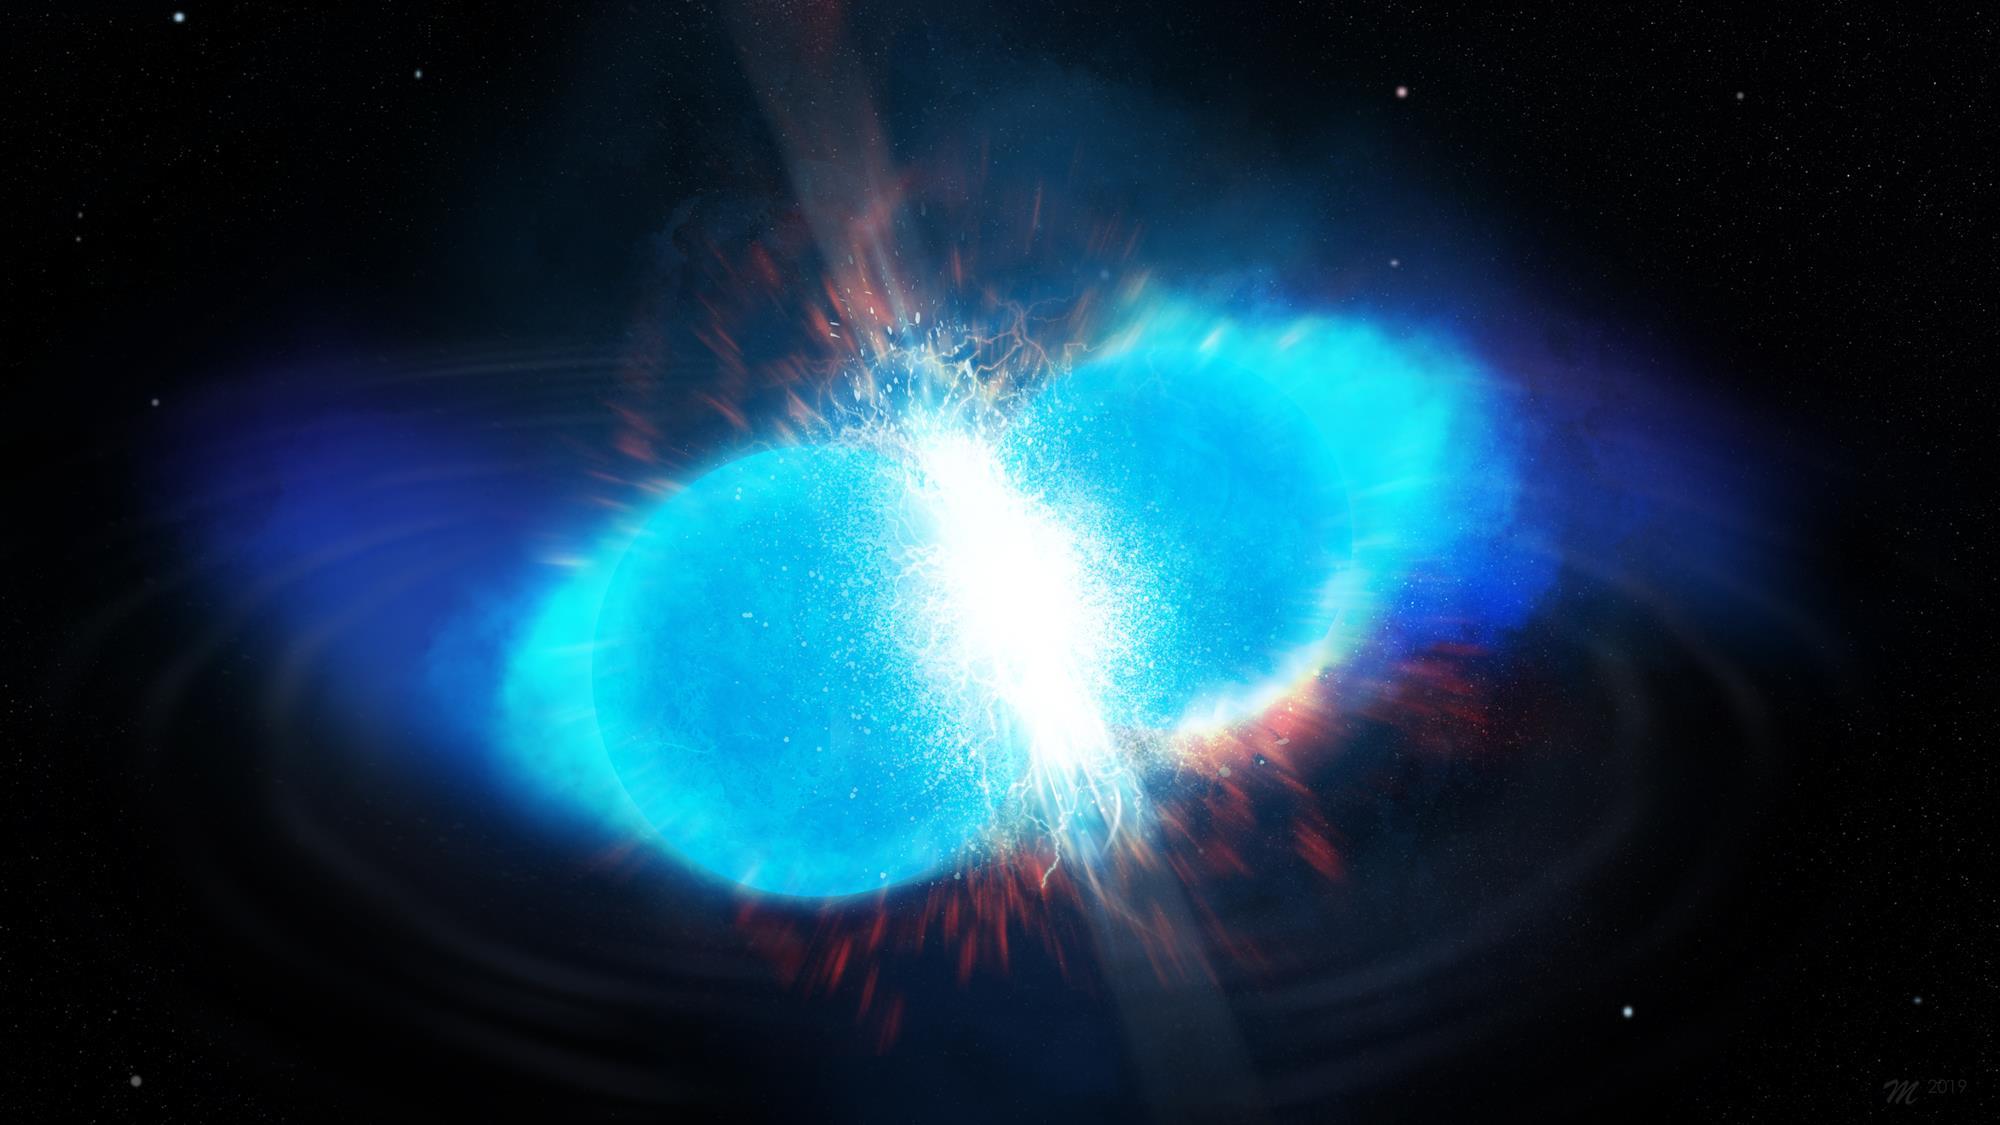 Superheavy elements forged in giant stellar collisions, Research